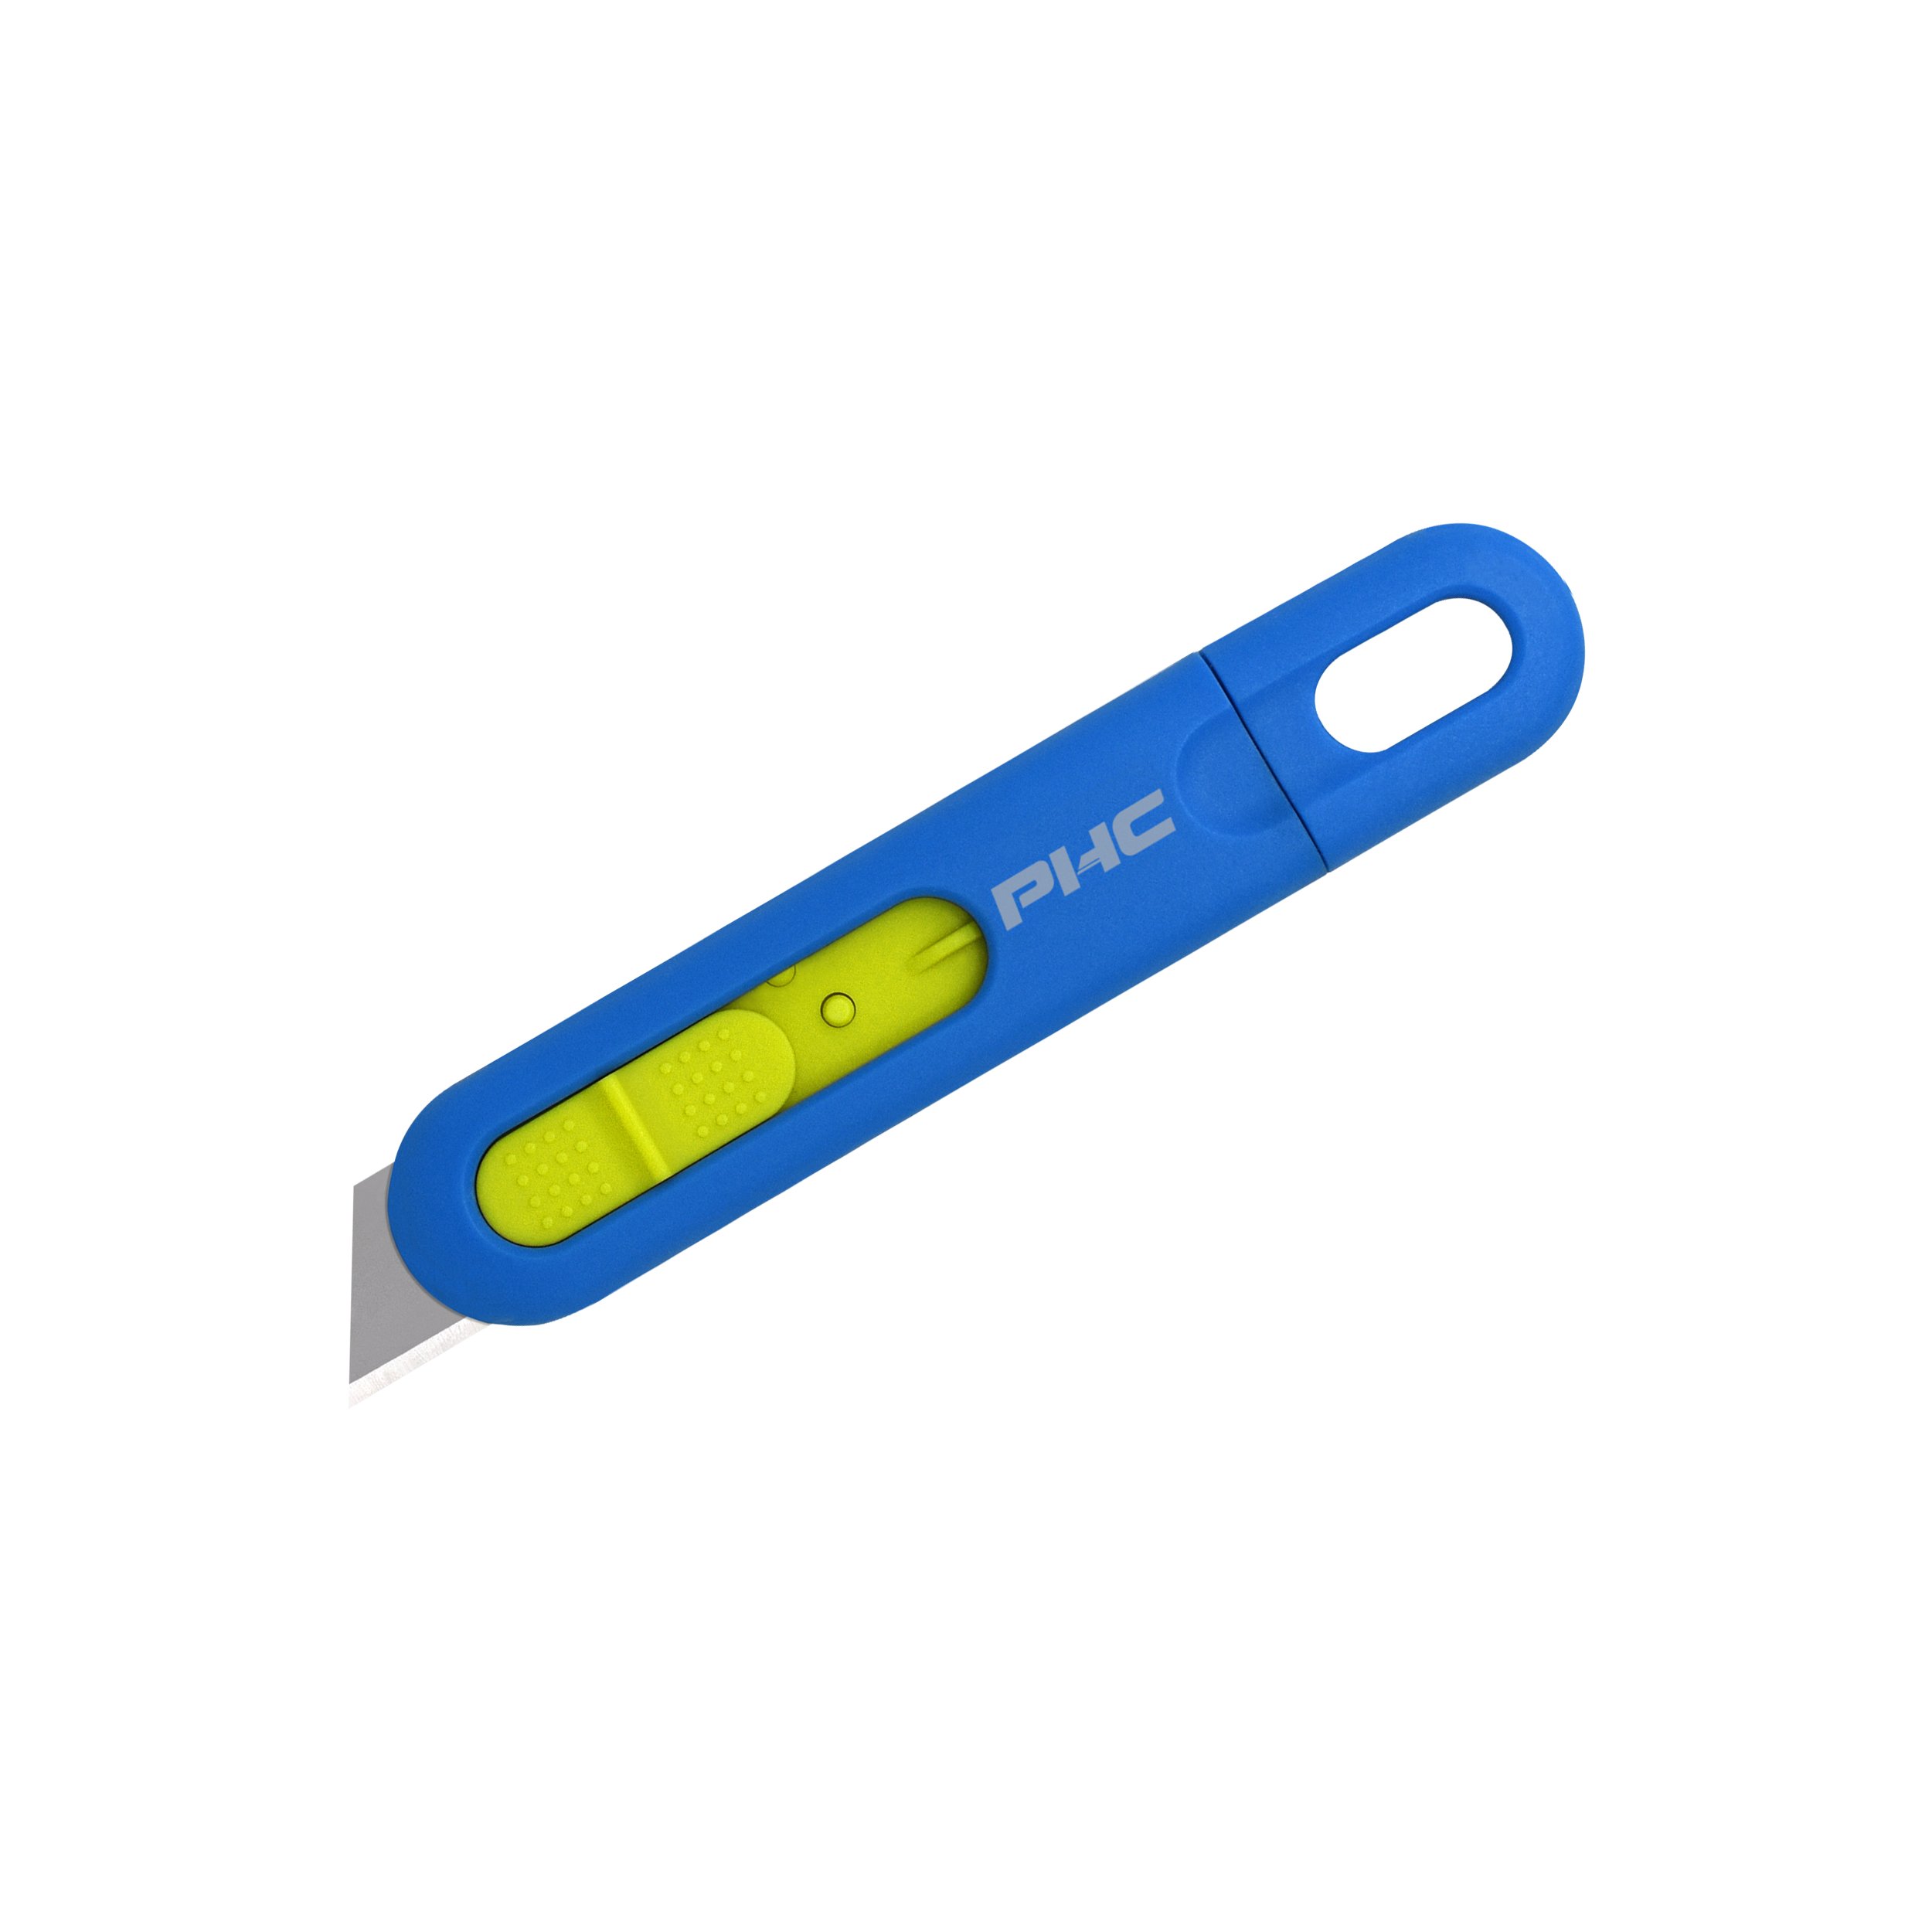 Auto-Retract Volo Disposable Safety Knife